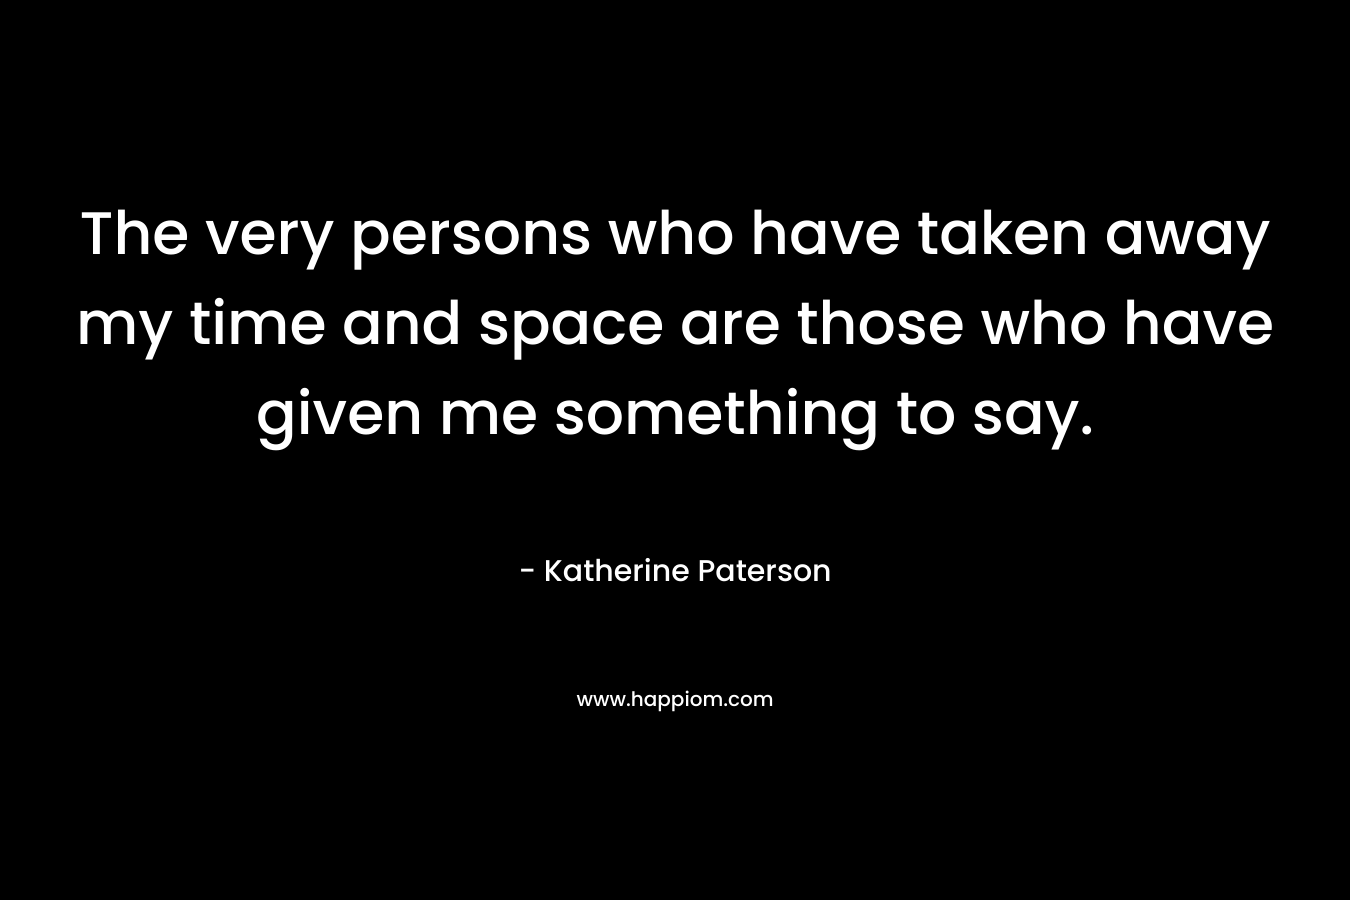 The very persons who have taken away my time and space are those who have given me something to say. – Katherine Paterson